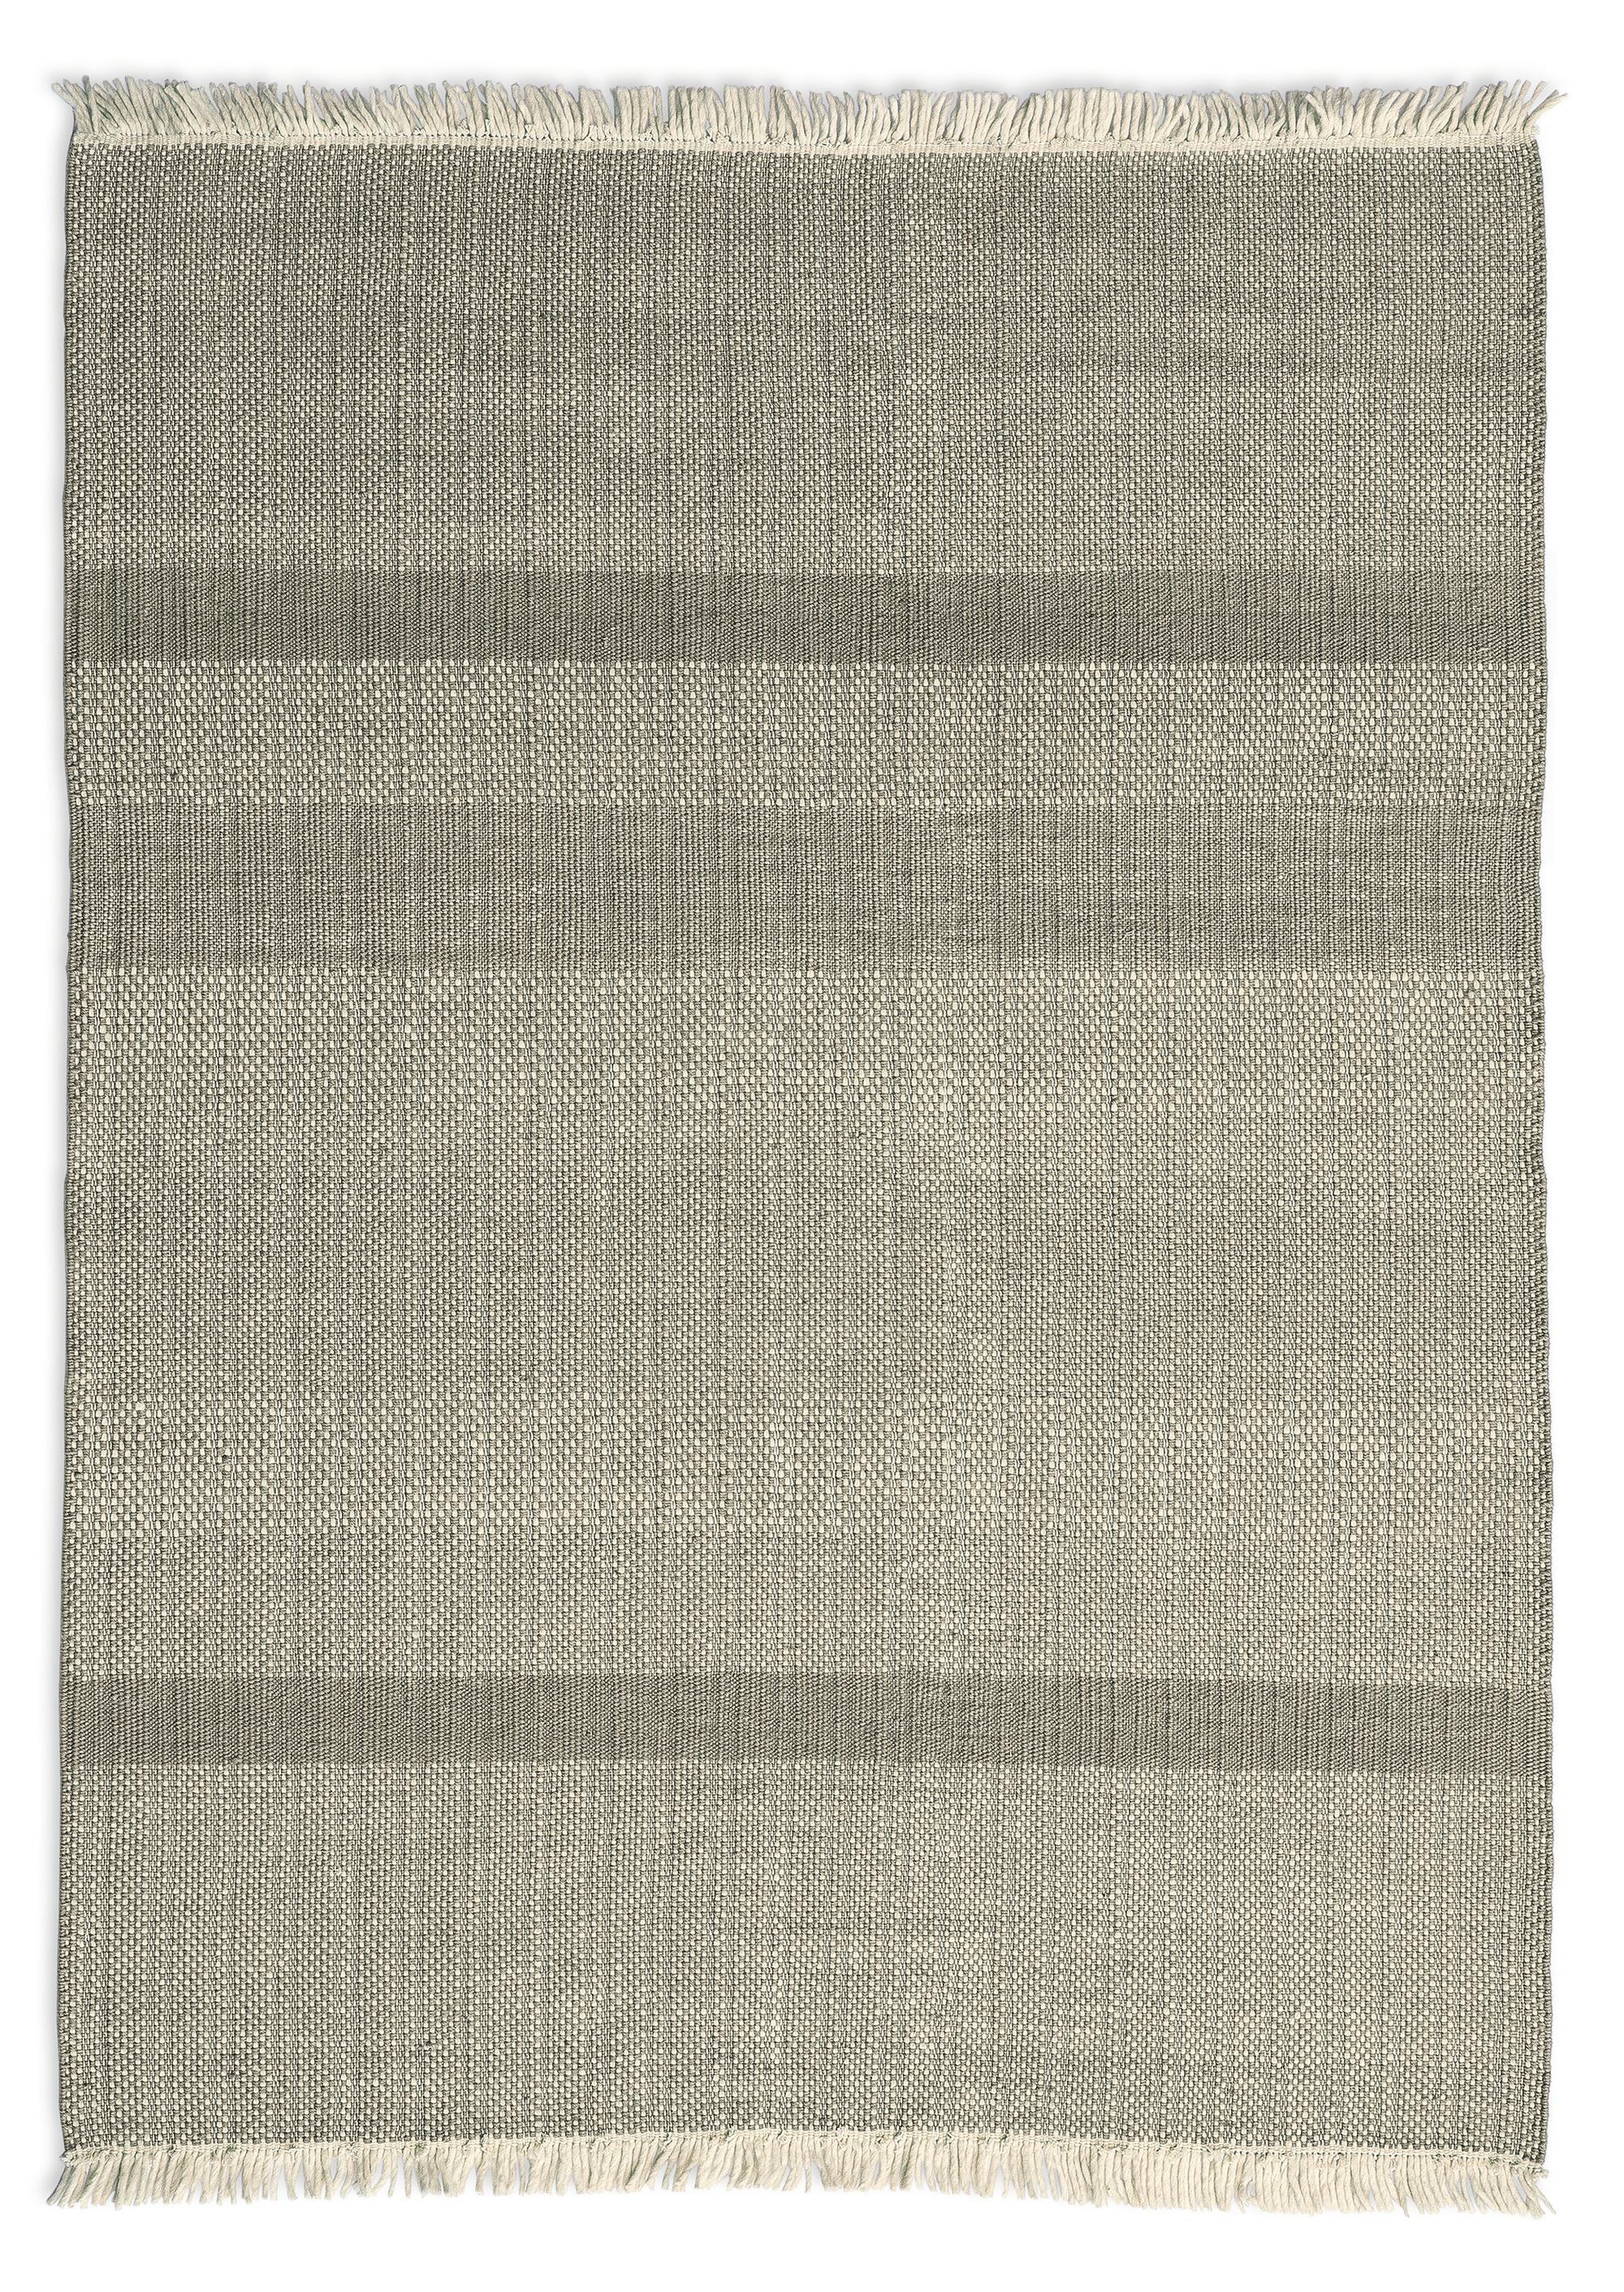 'Tres Texture' Hand-Loomed Rug for Nanimarquina For Sale 3